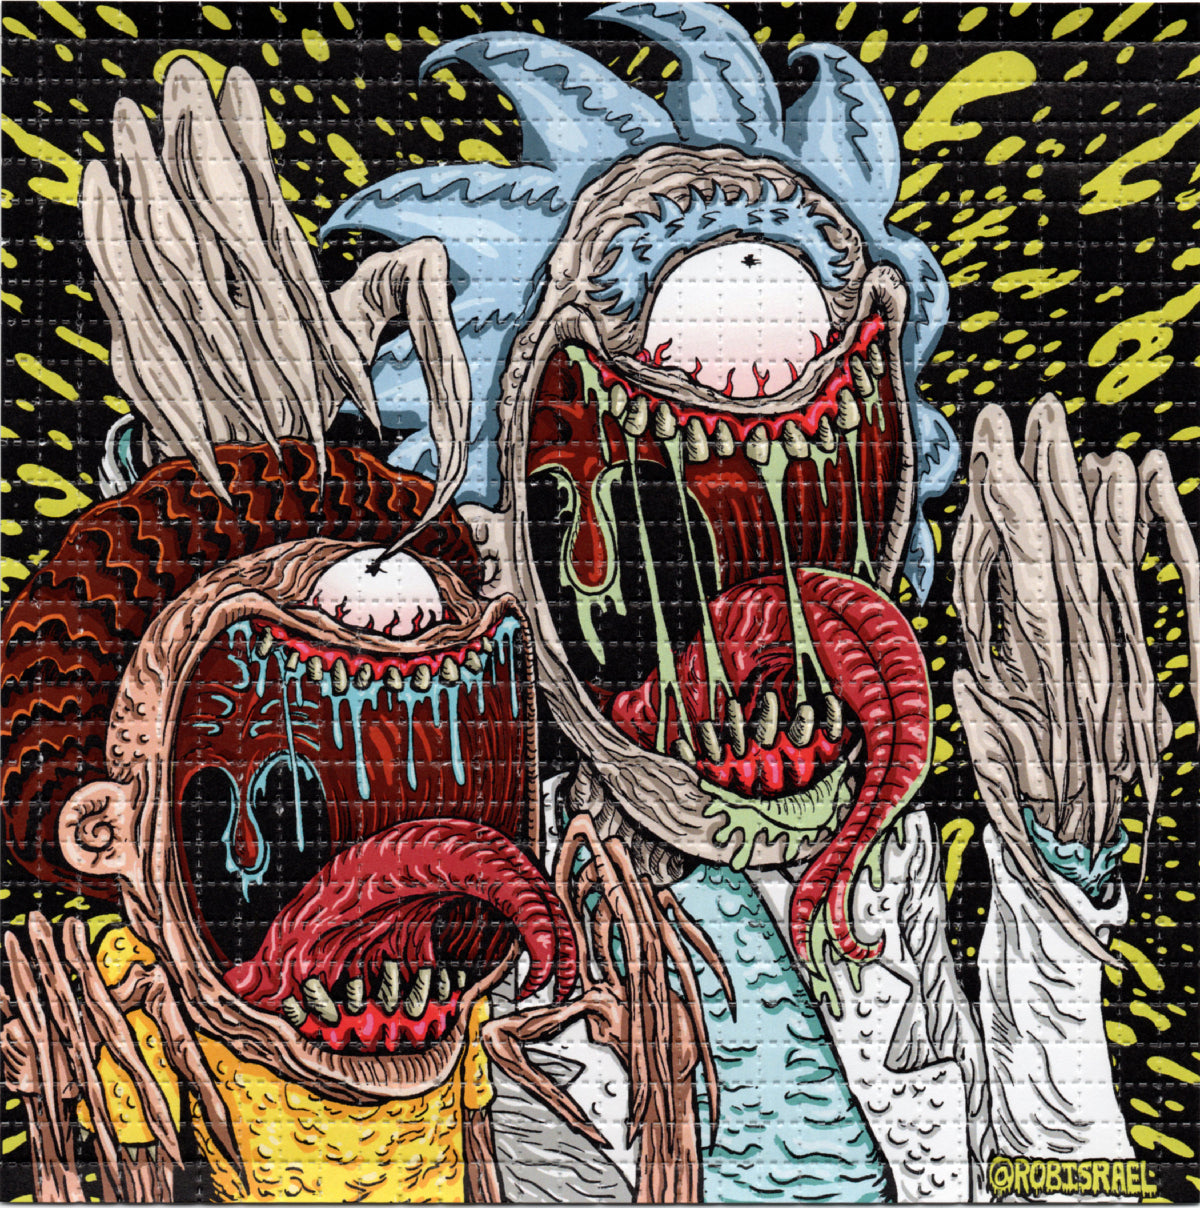 Monster Mouth R&M by Rob Israel Limited Edition LSD blotter art print